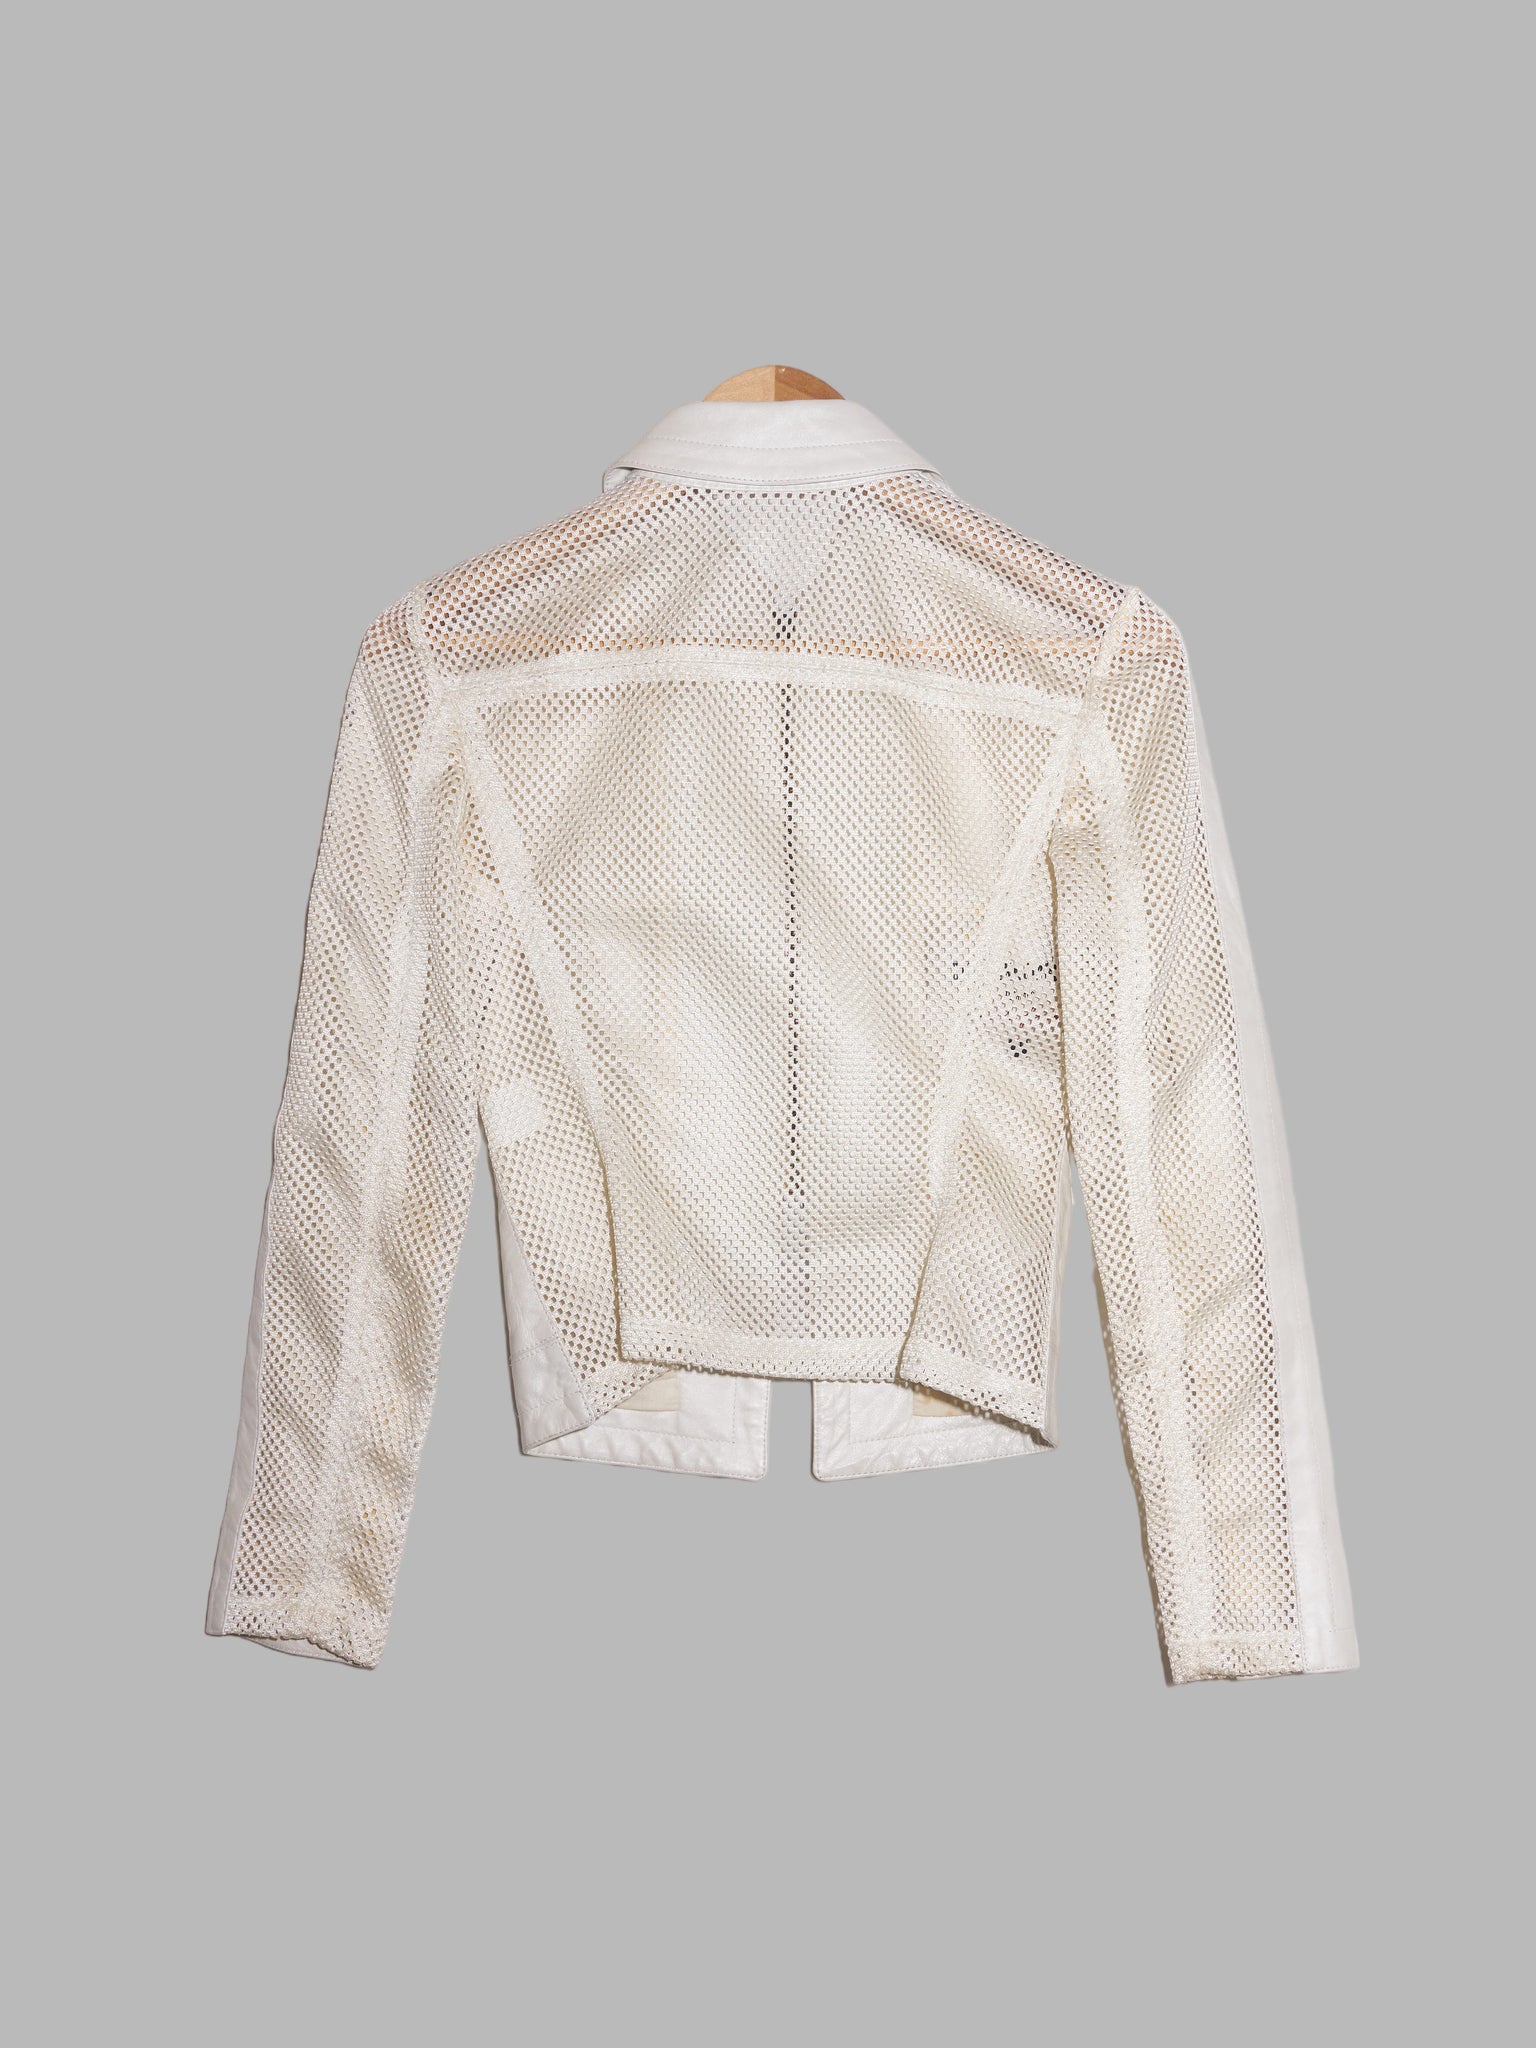 Dirk Bikkembergs spring 1996 white leather jacket with mesh back